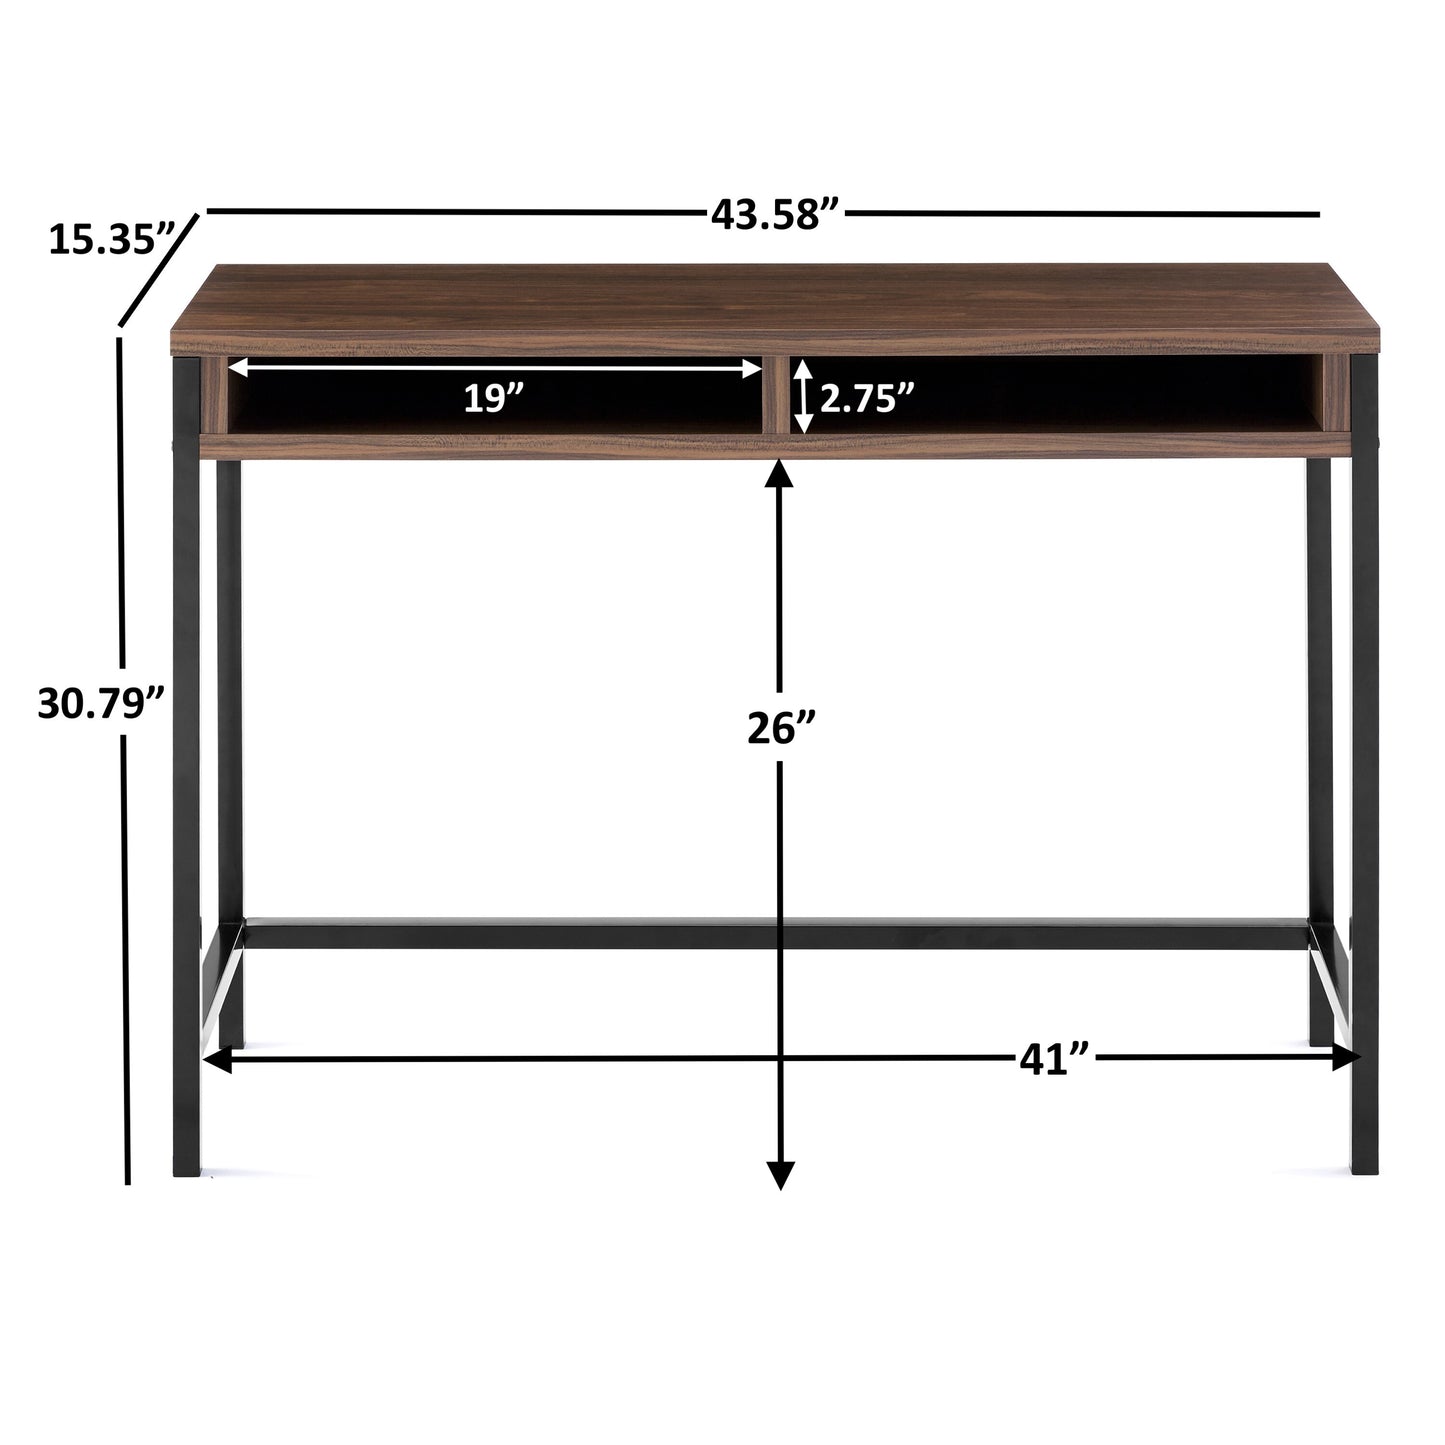 Student Desk Wooden Computer Desk Office Desk Modern Writing Table Study Table Home Office Furniture (US Stock)